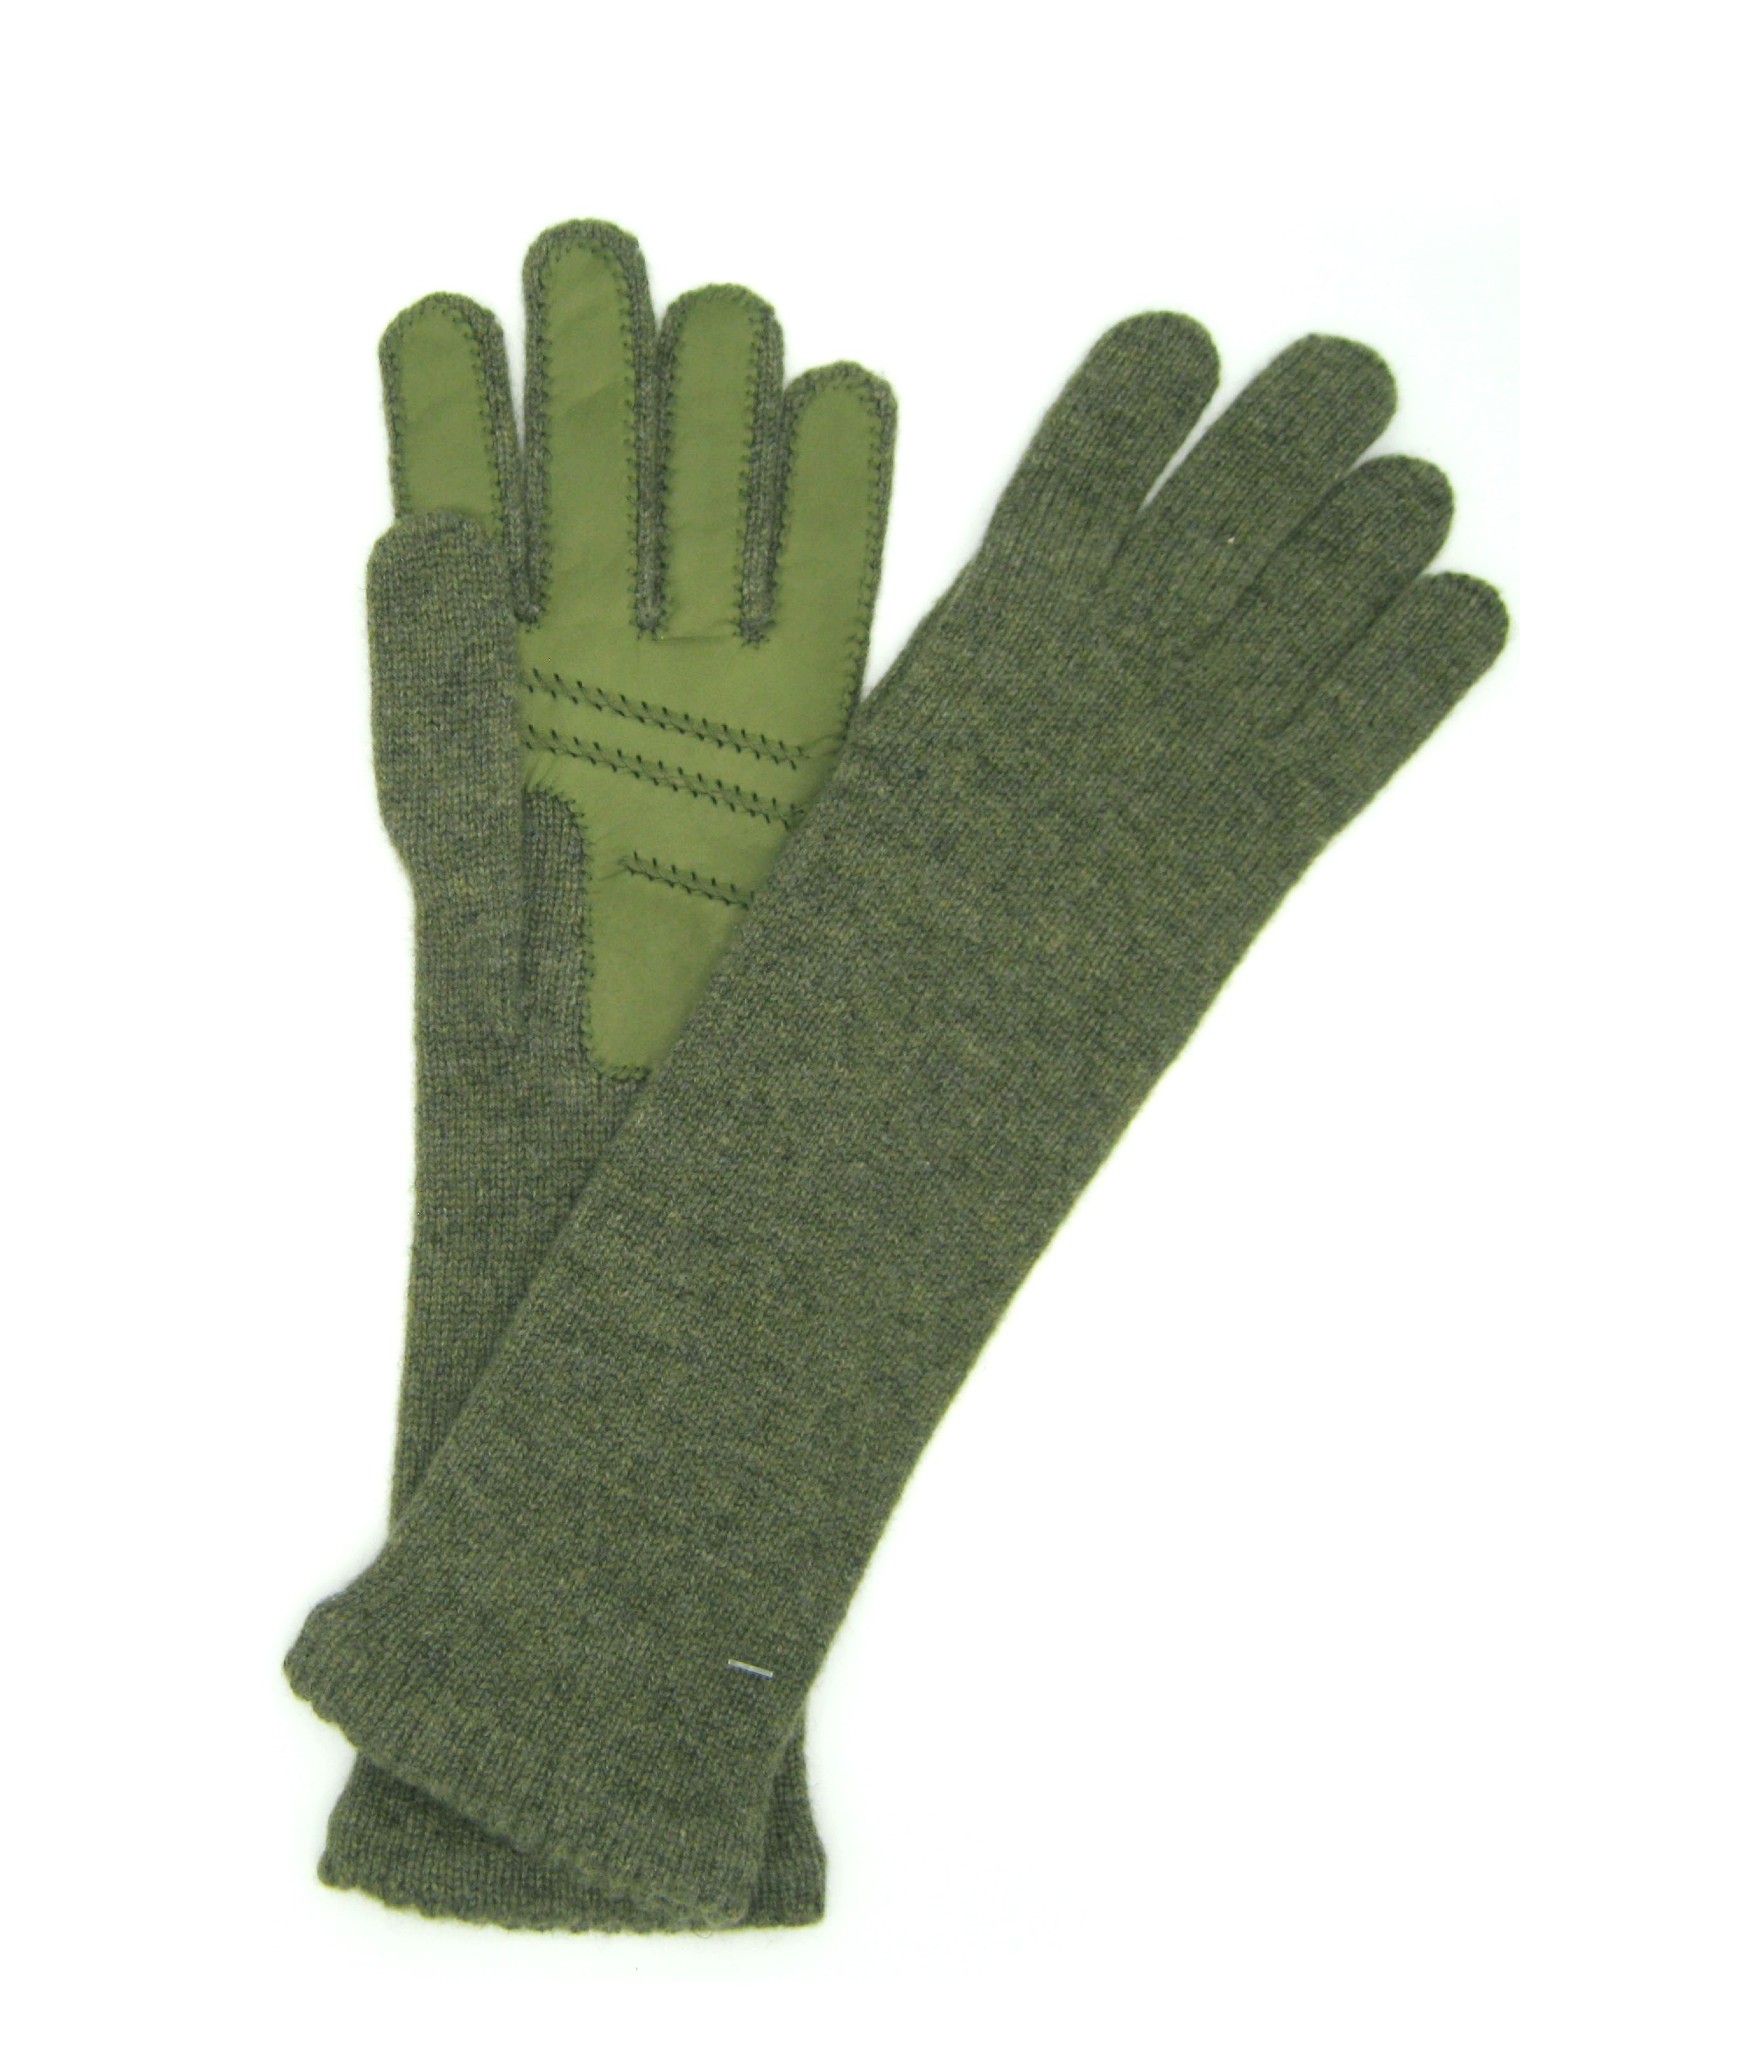 100%cashmere gloves 4BT with Nappa leather palm Olive green/Olive Green